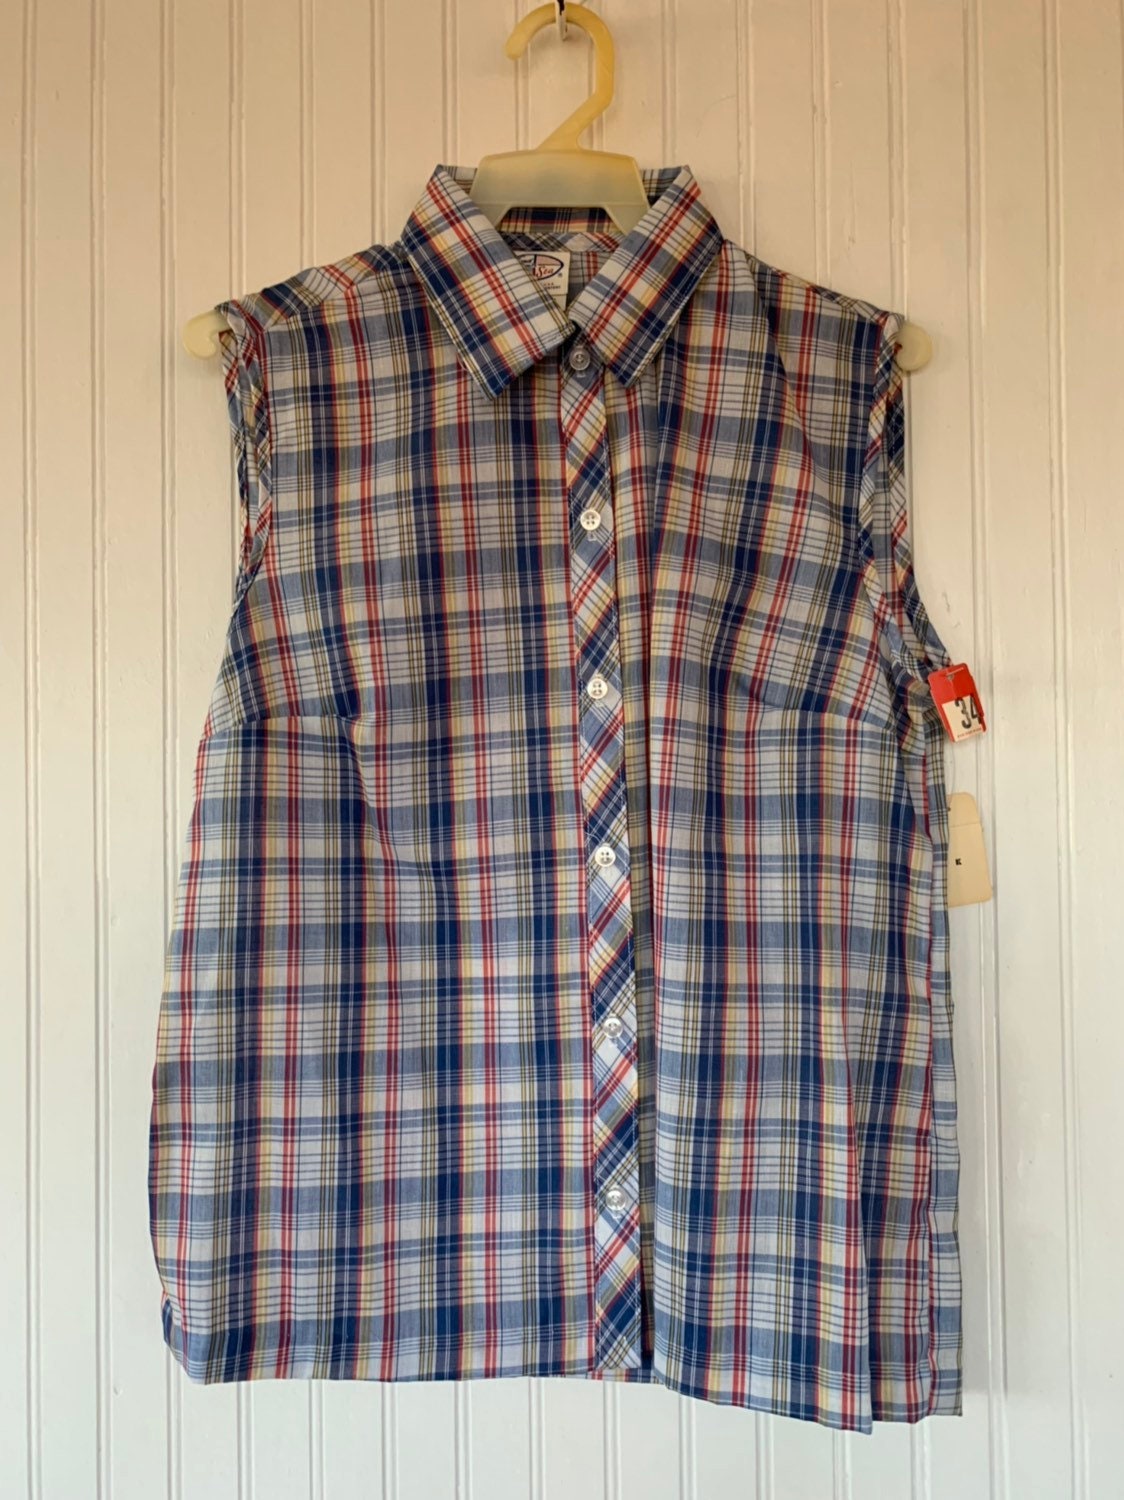 NWT 80s Vintage Plaid Sleeveless Top Size Small Blue Red White Yellow ...